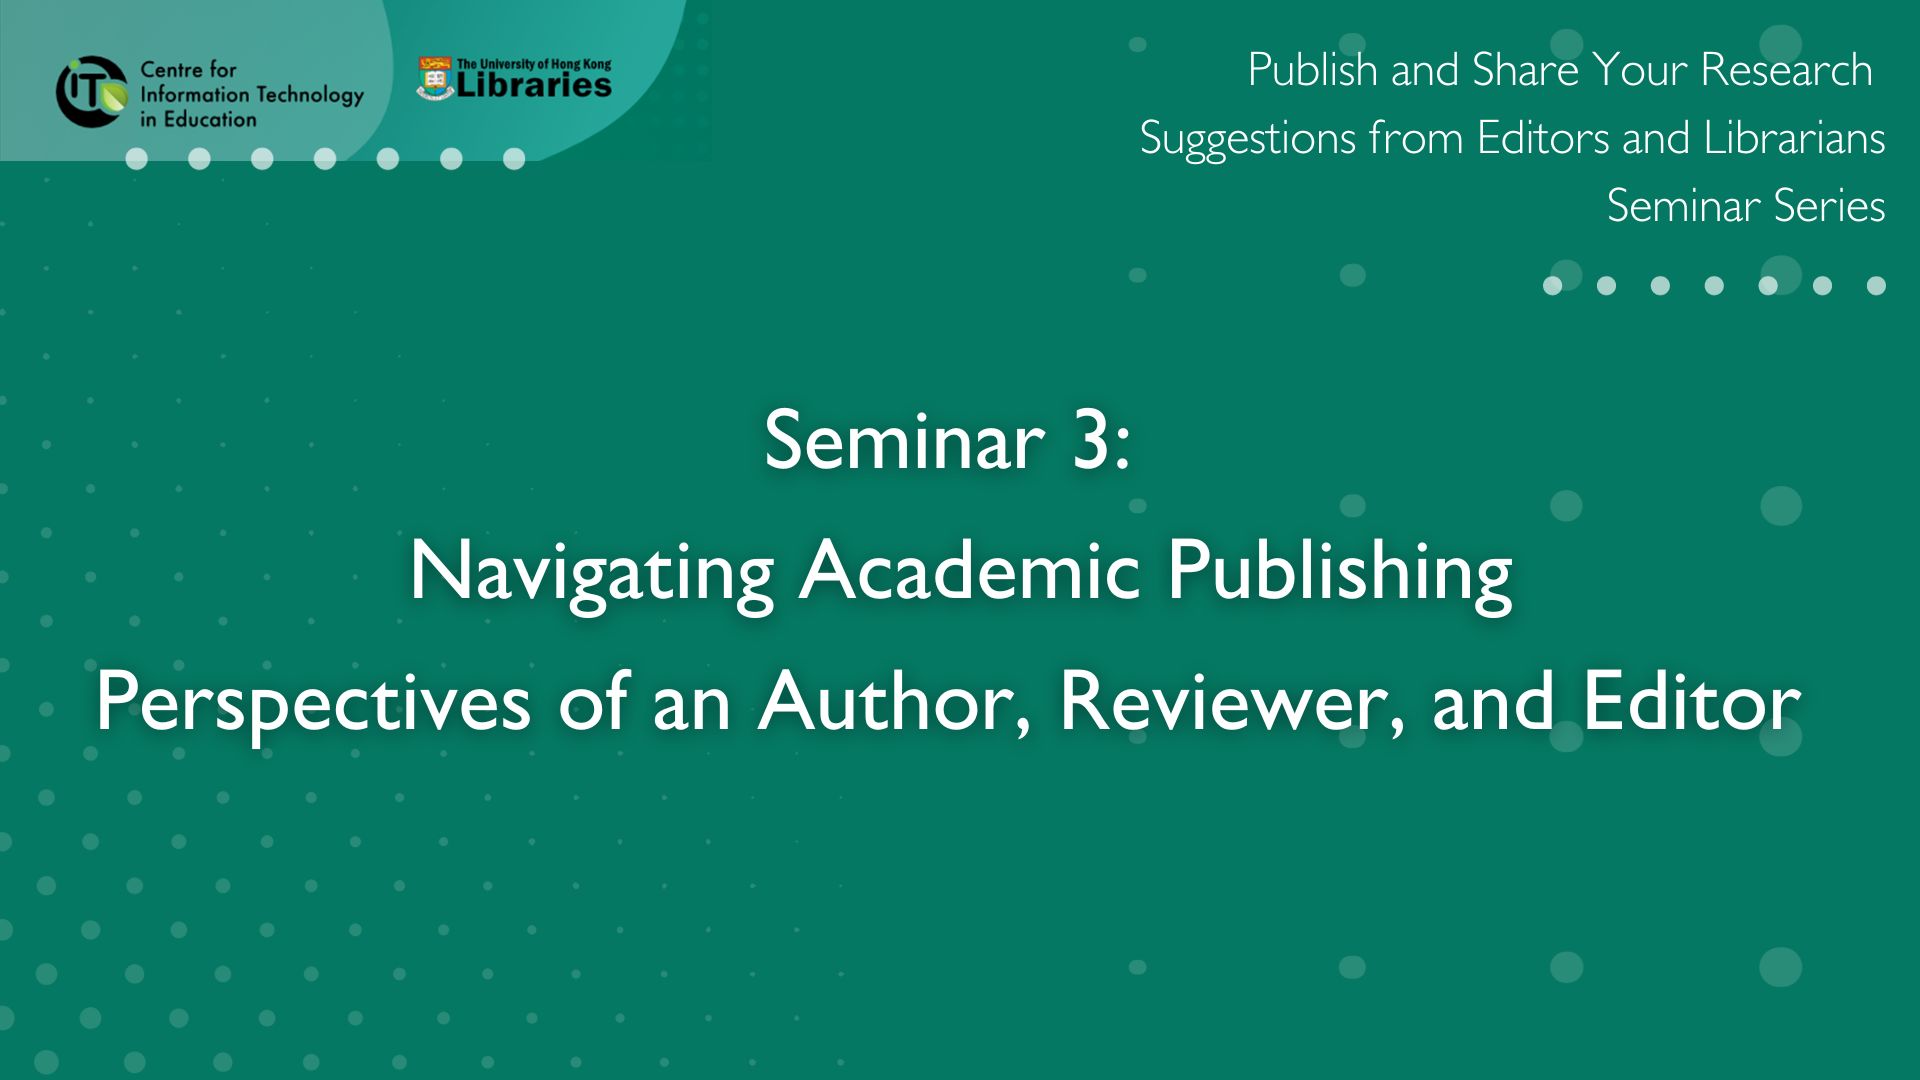 Navigating Academic Publishing: Perspectives of an Author, Reviewer, and Editor